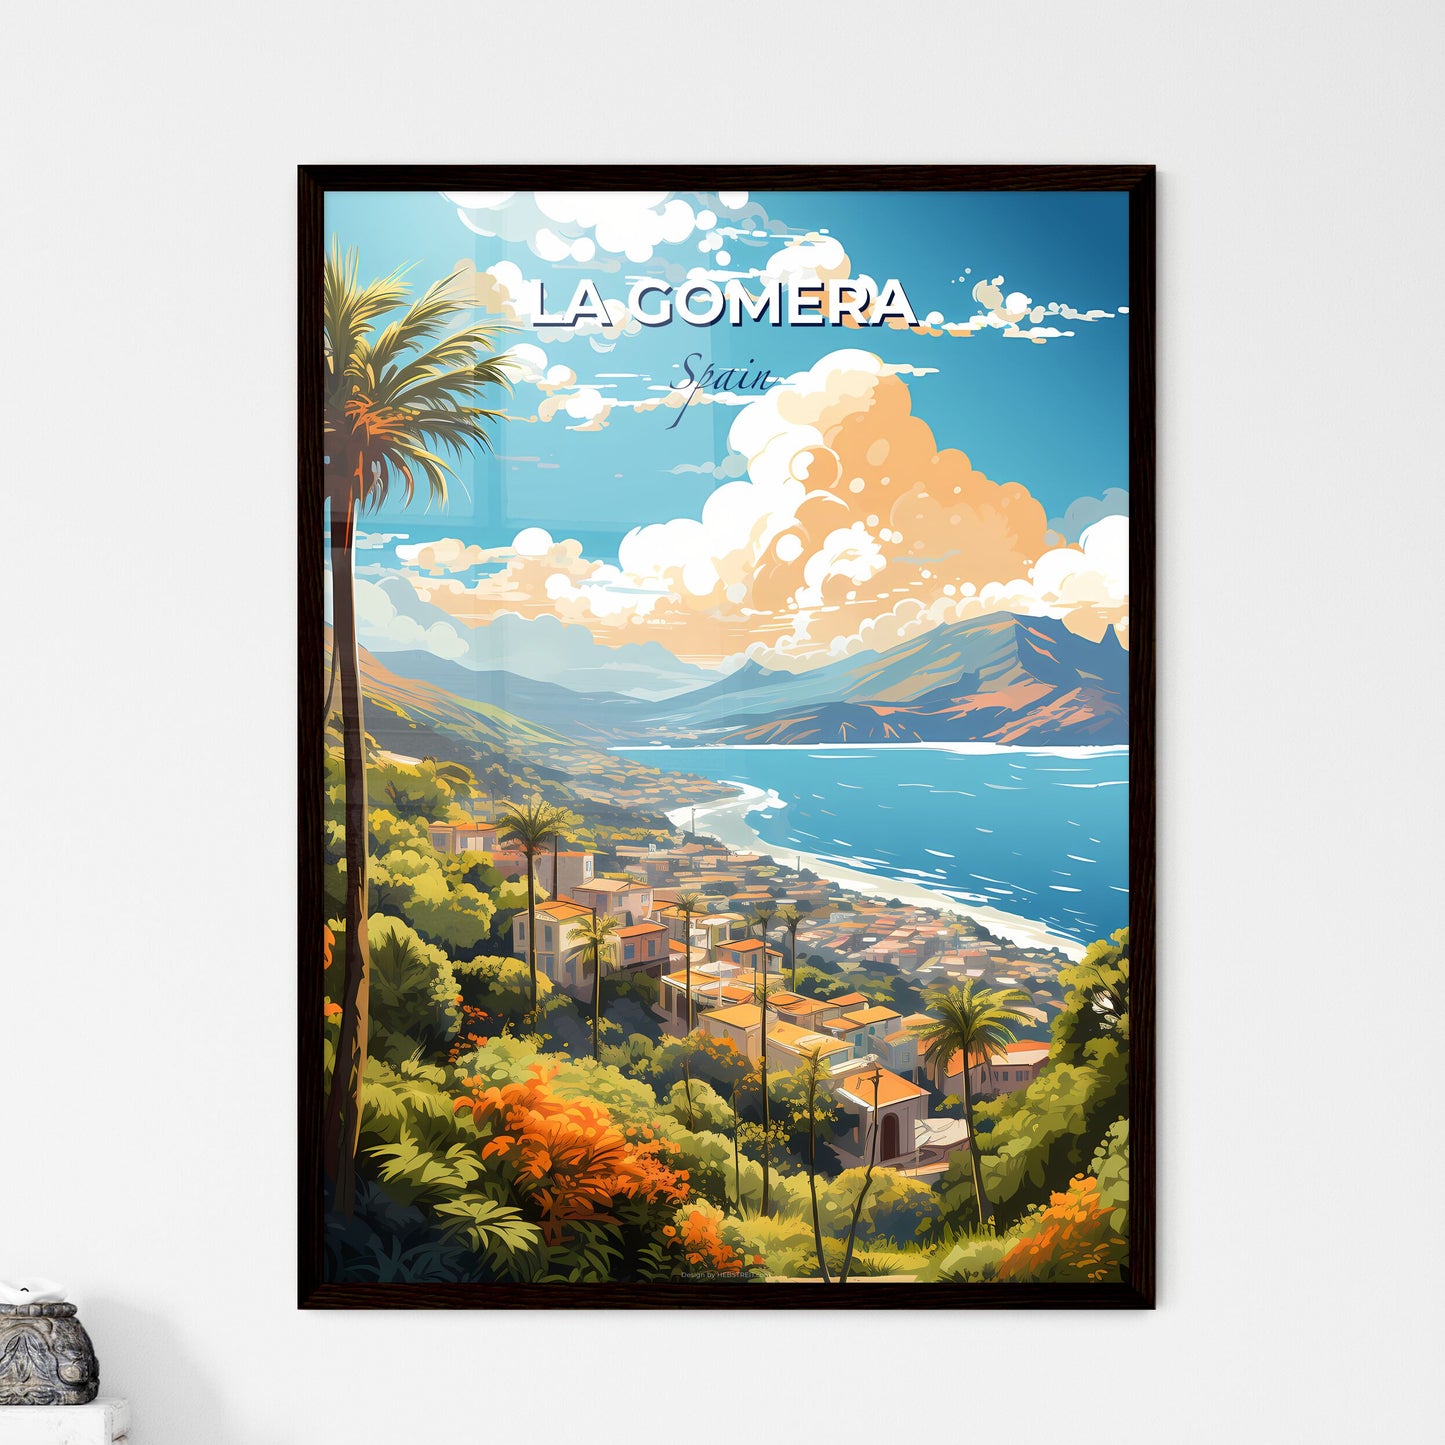 La Gomera Spain Skyline - A Landscape Of A Town By The Water - Customizable Travel Gift Default Title